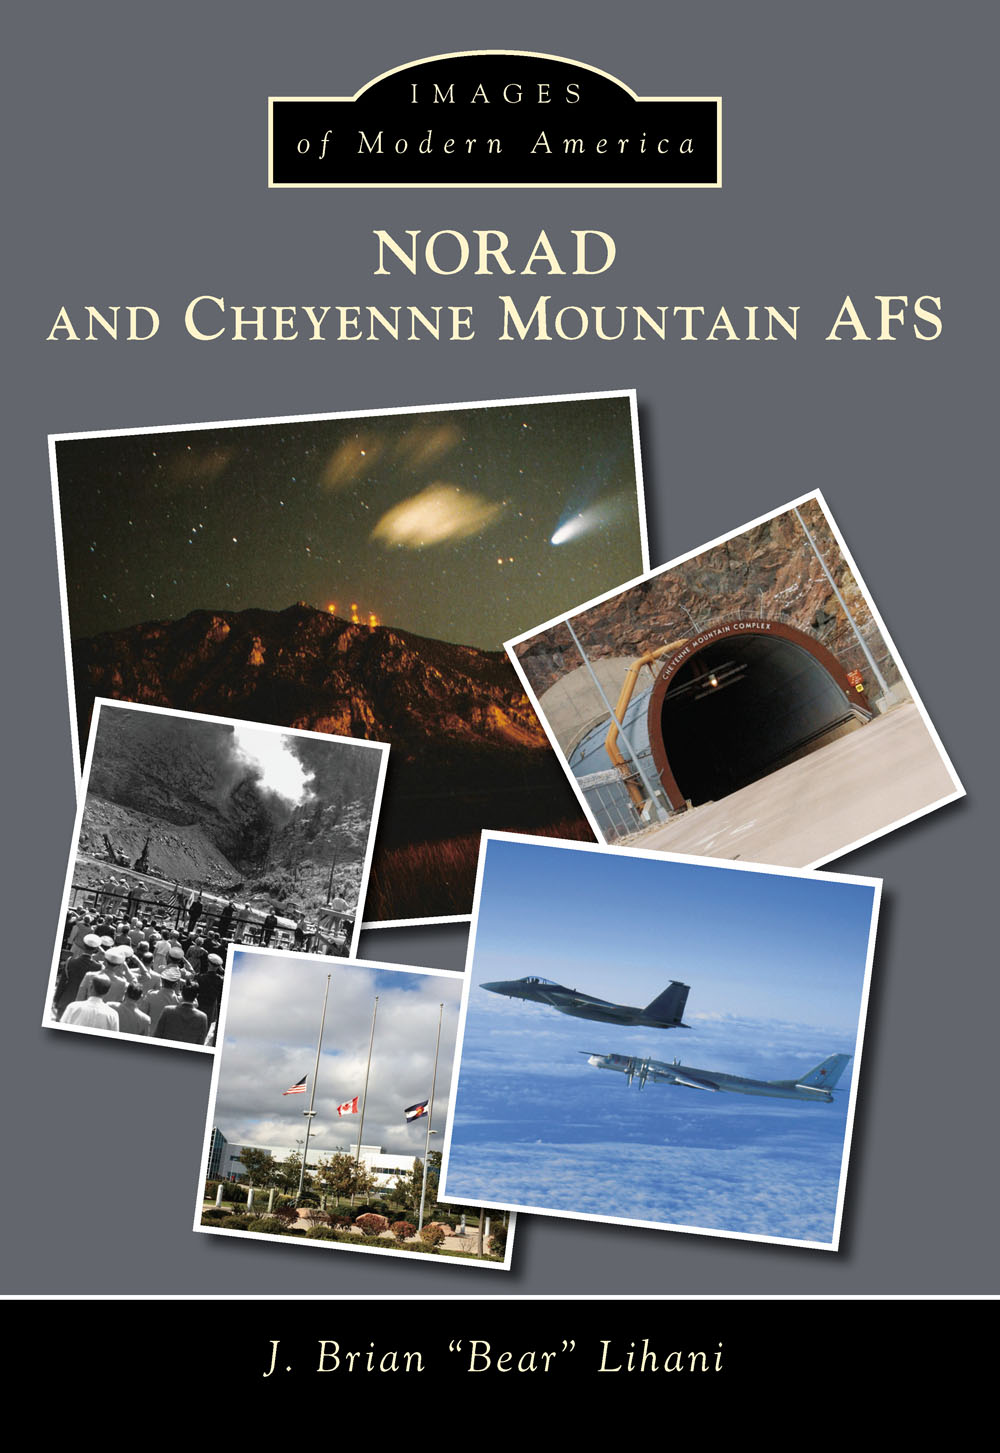 IMAGES of Modern America NORAD AND CHEYENNE MOUNTAIN AFS ON THE FRONT - photo 1